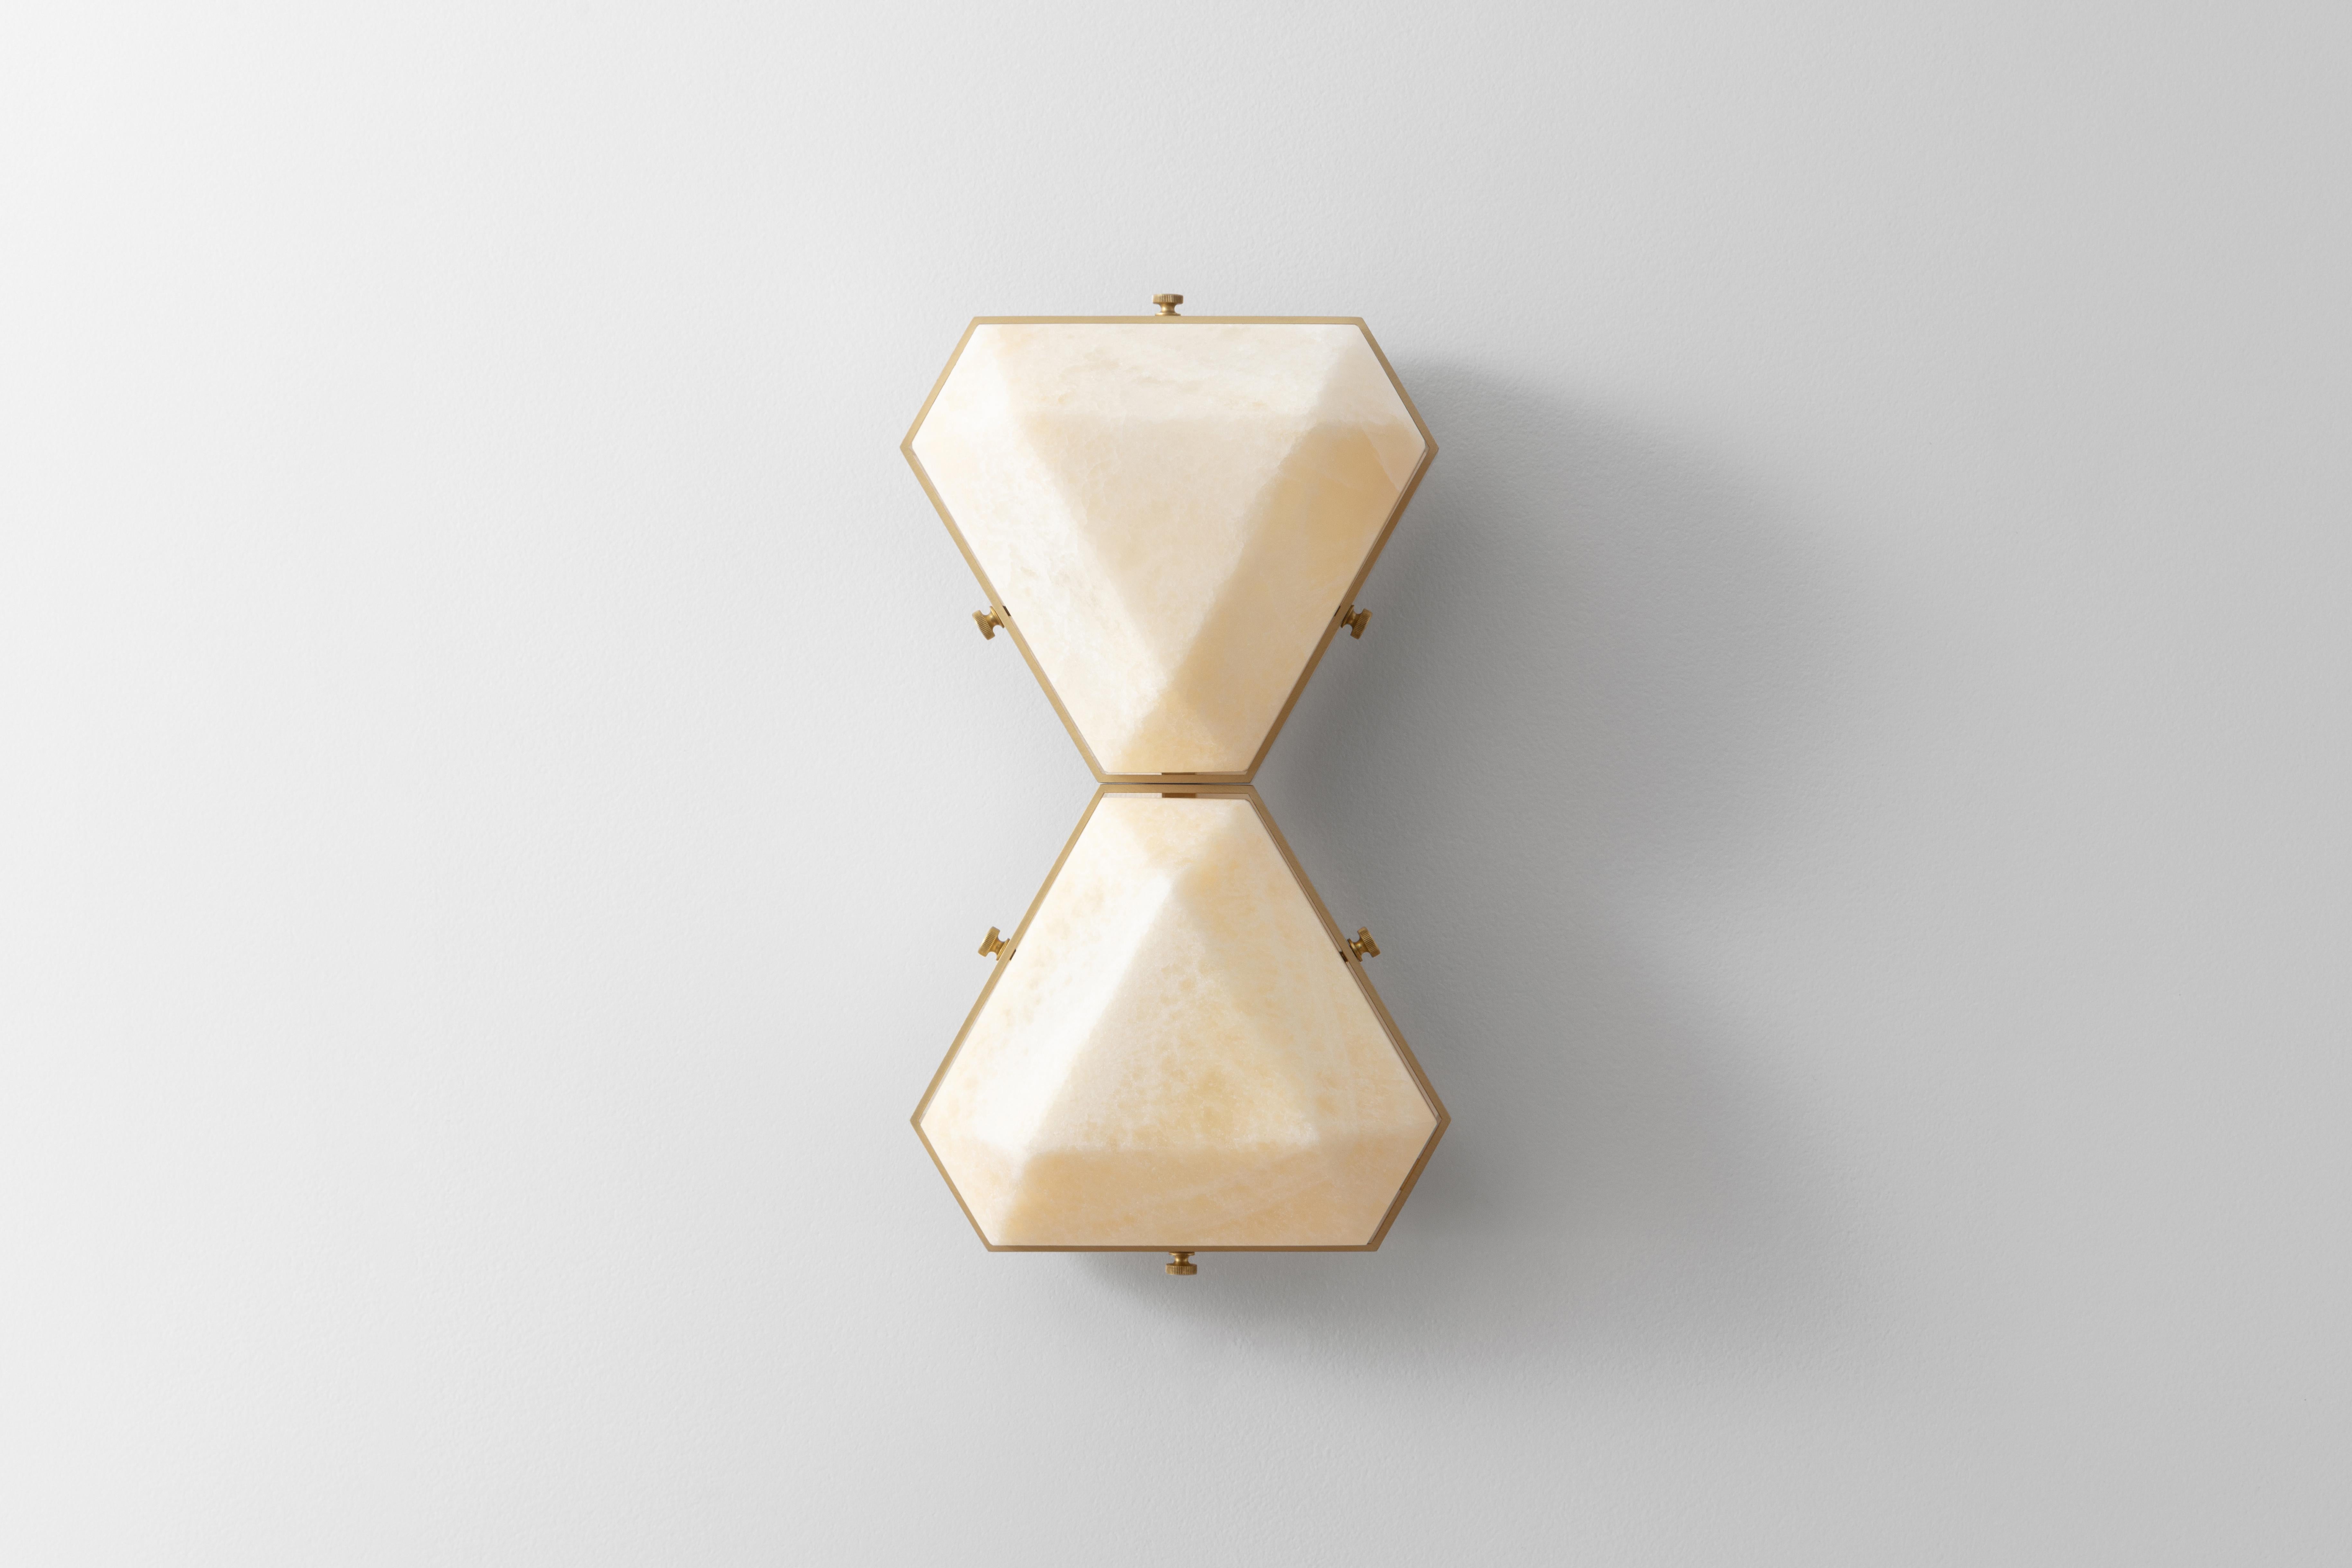 The Vega Due is a geometric, modular, contemporary lighting fixture. Vega is suitable for installation on the ceiling as a flush mount, or on the wall as a sconce. The body is made from extruded aluminum with brass accents. The diffusers are carved